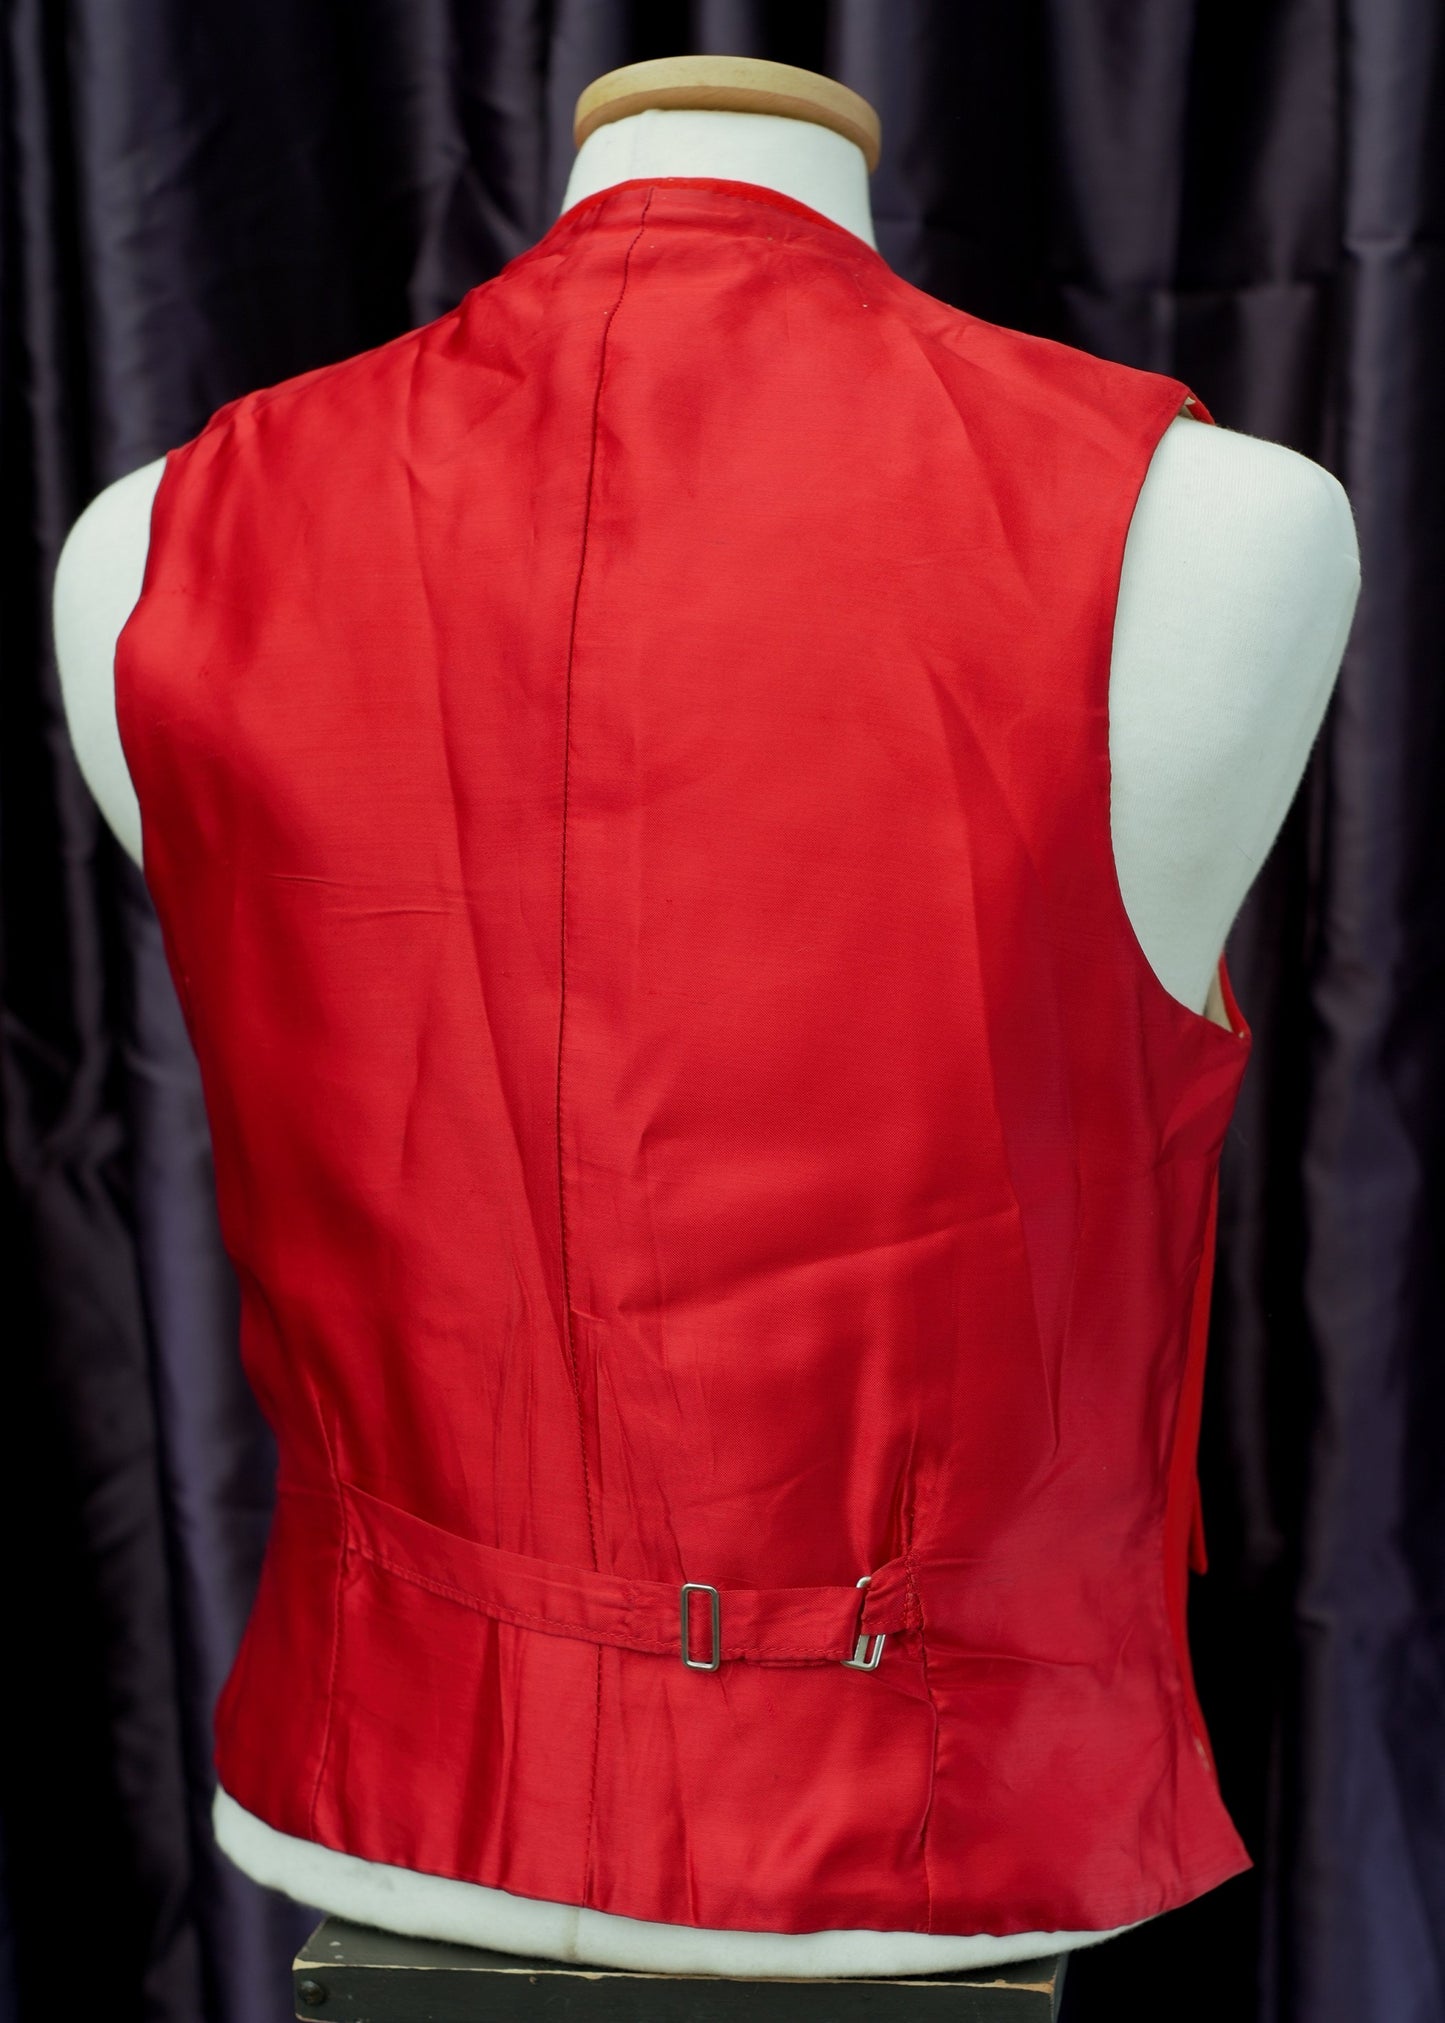 Classic Red Wool Doeskin Hunting Waistcoat Vest by Hornes